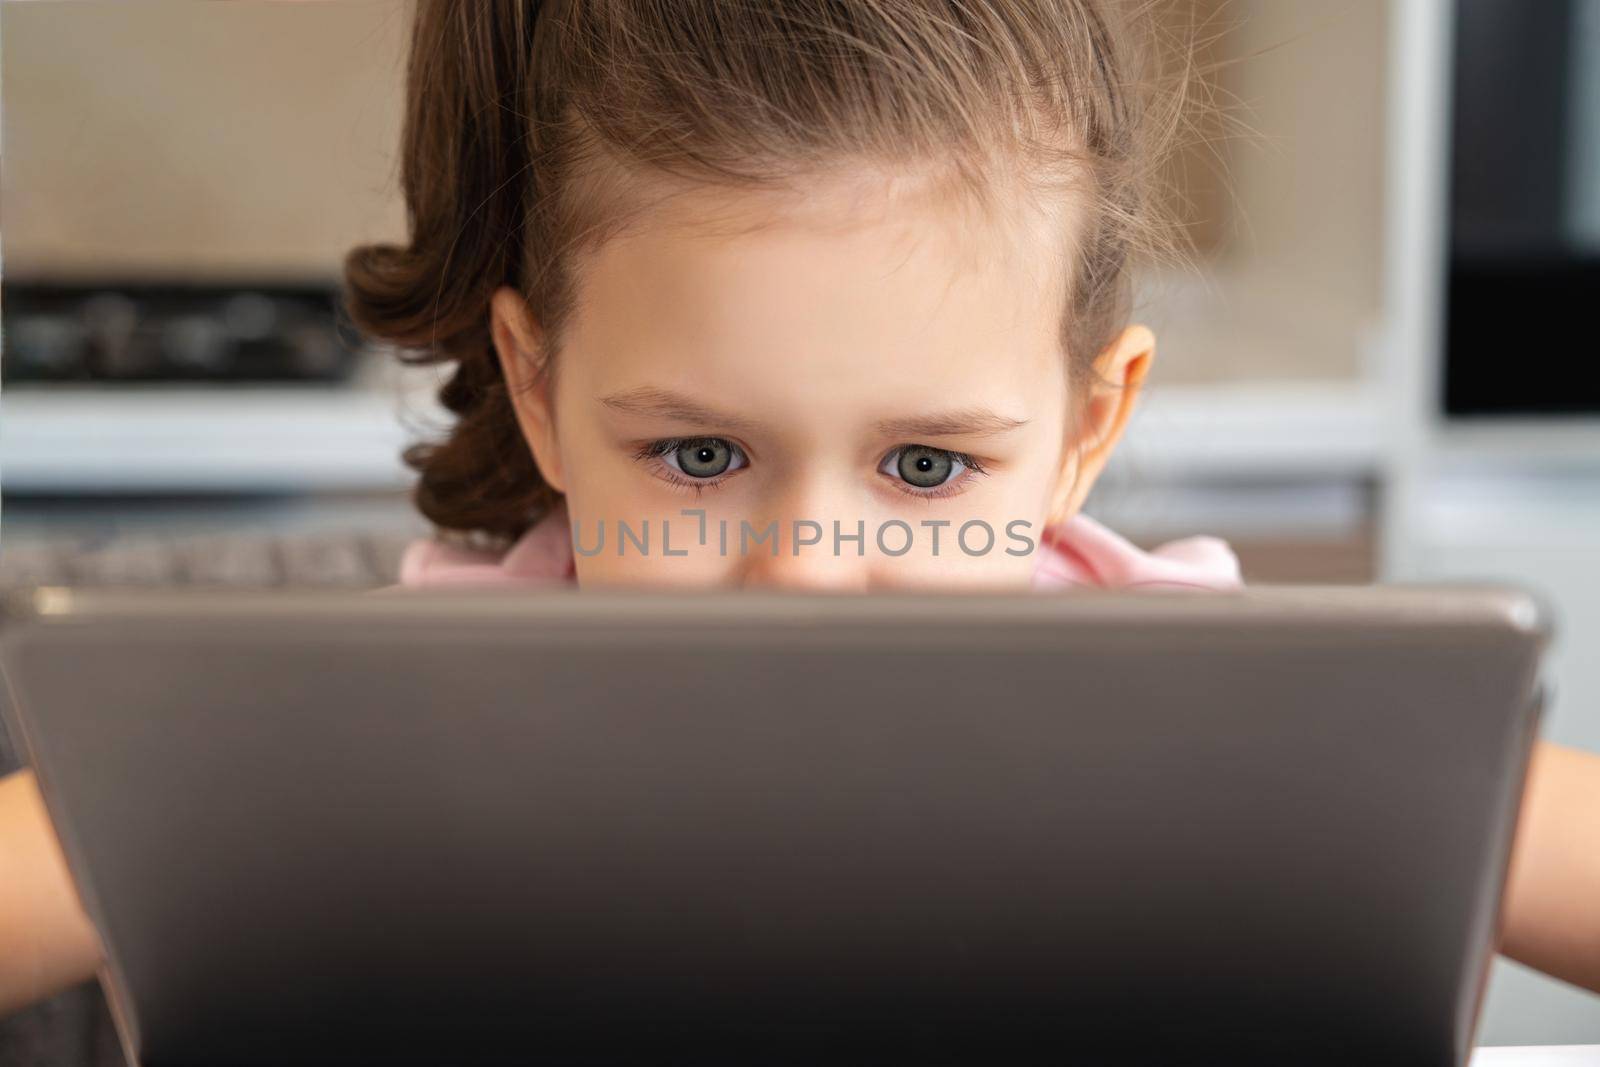 A close up of a little girl looking at a laptop or tablet with copy space by Mariakray